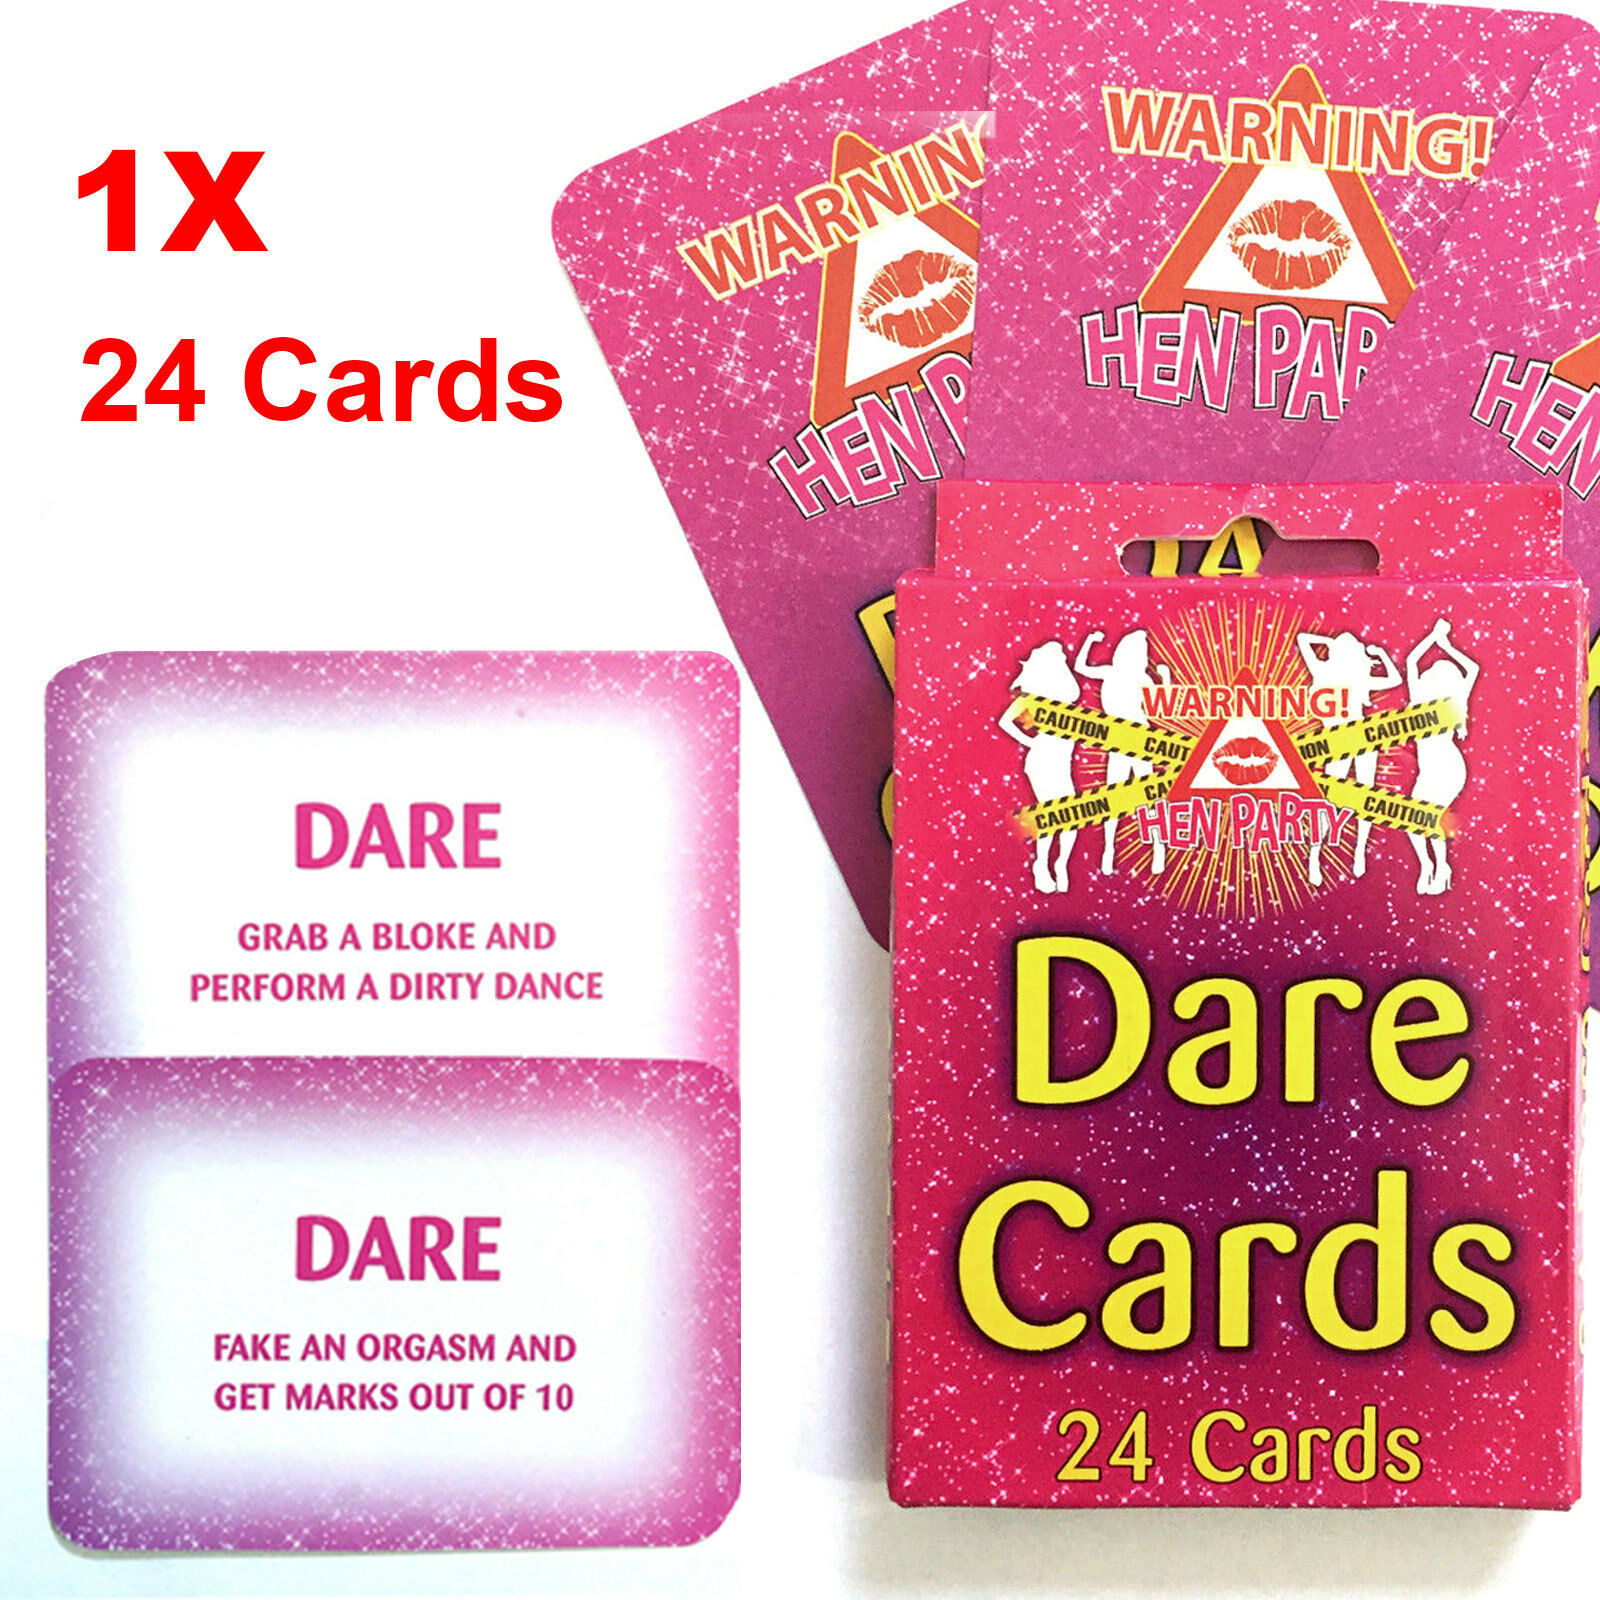 24 Hen Do Girls Party DARE CARDS Night Out Pink Accessories Novelty Game 